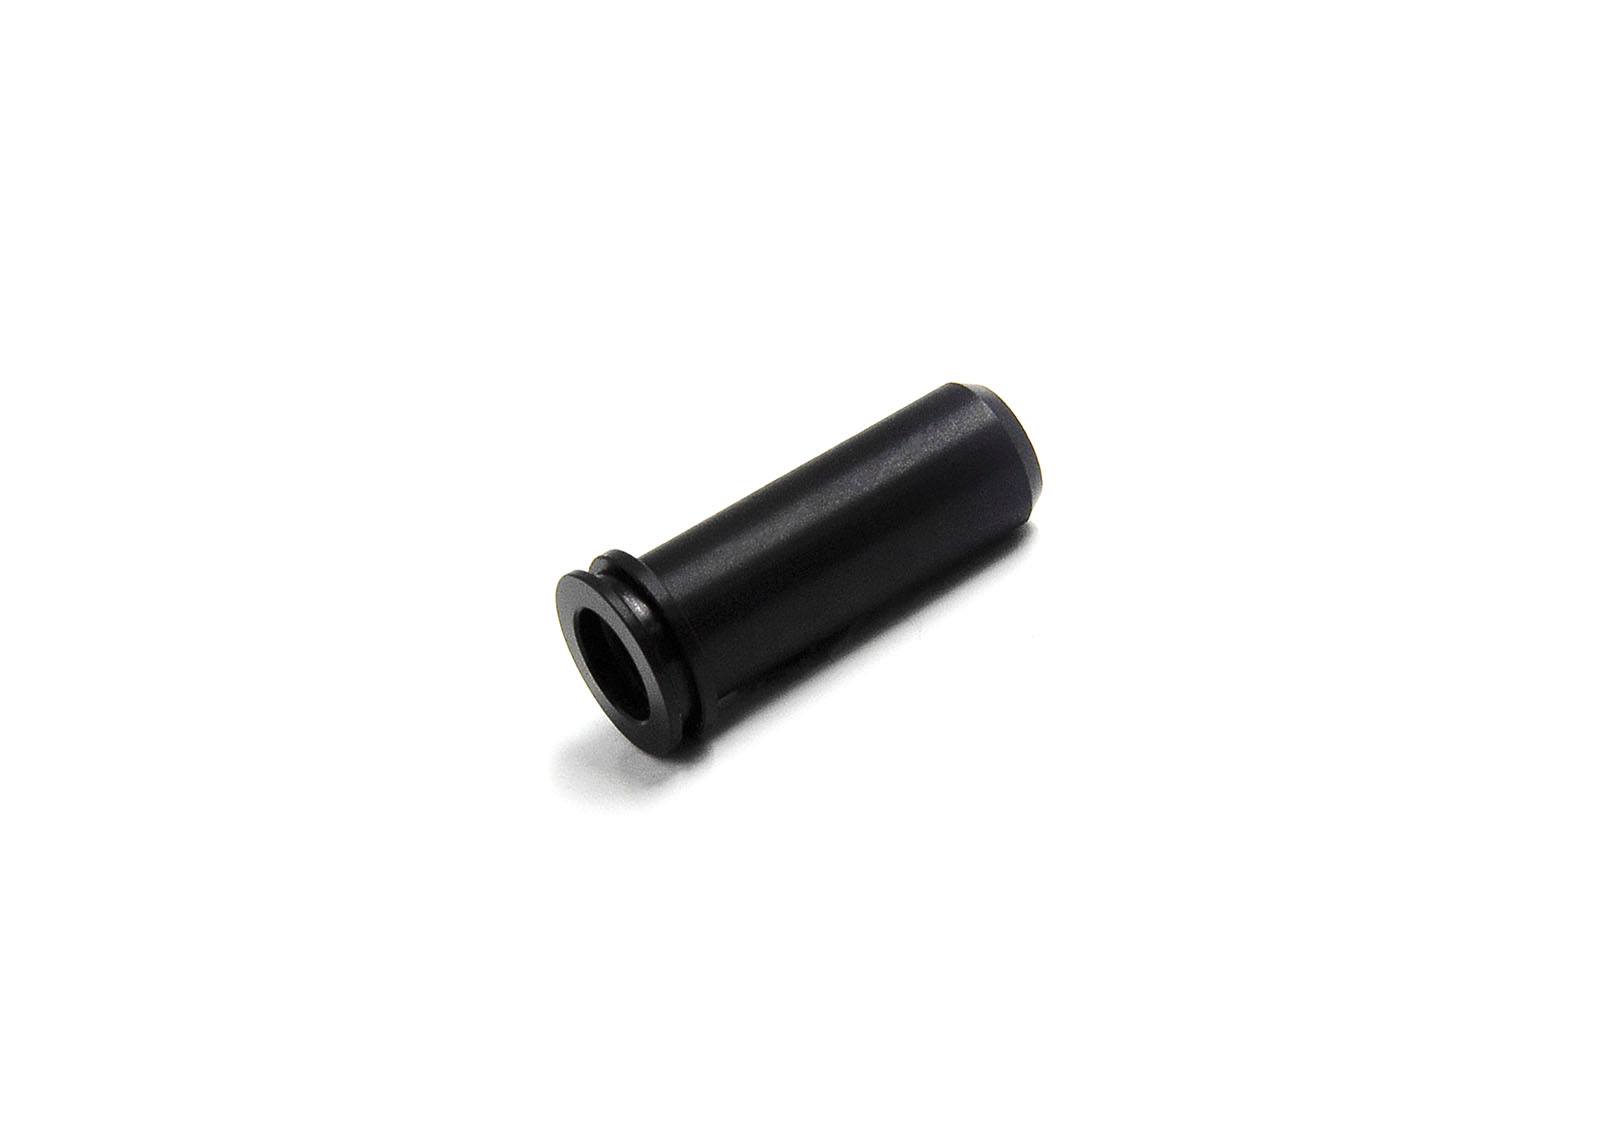 Air Seal Nozzle for MP5K, PDW - Modify AEG Airsoft parts